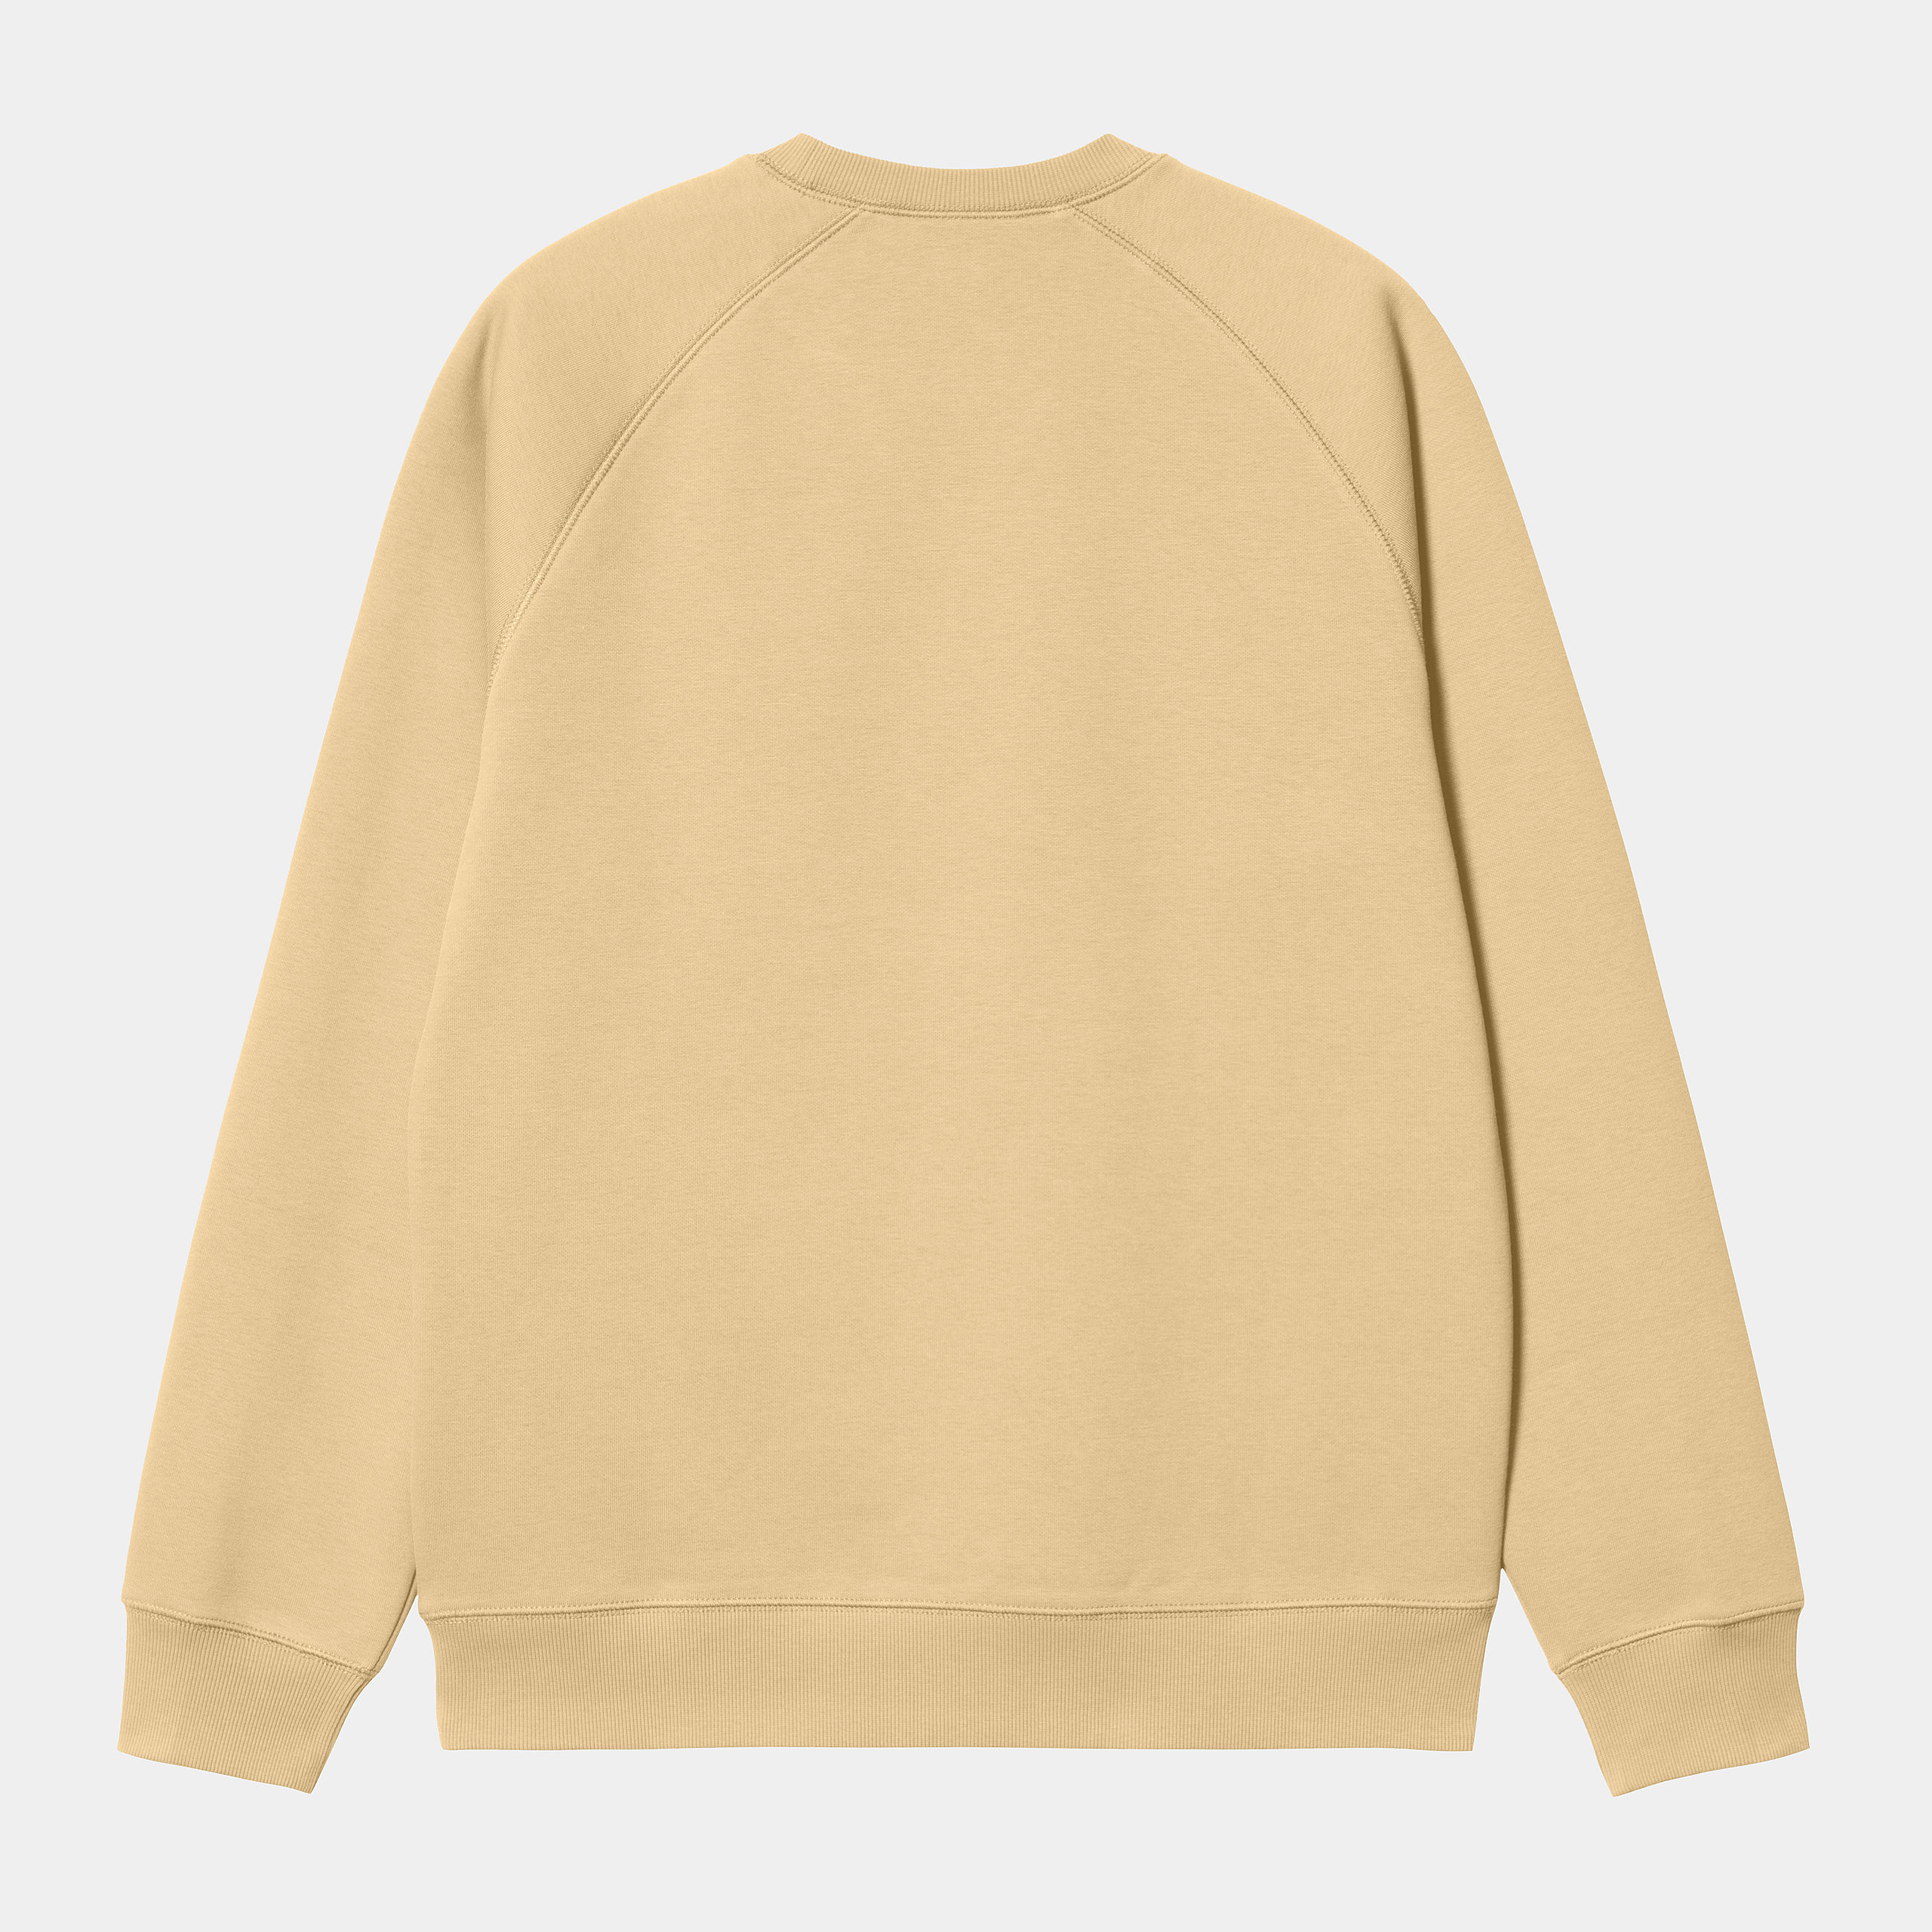 Carhartt WIP - CHASE SWEAT - Citron/Gold